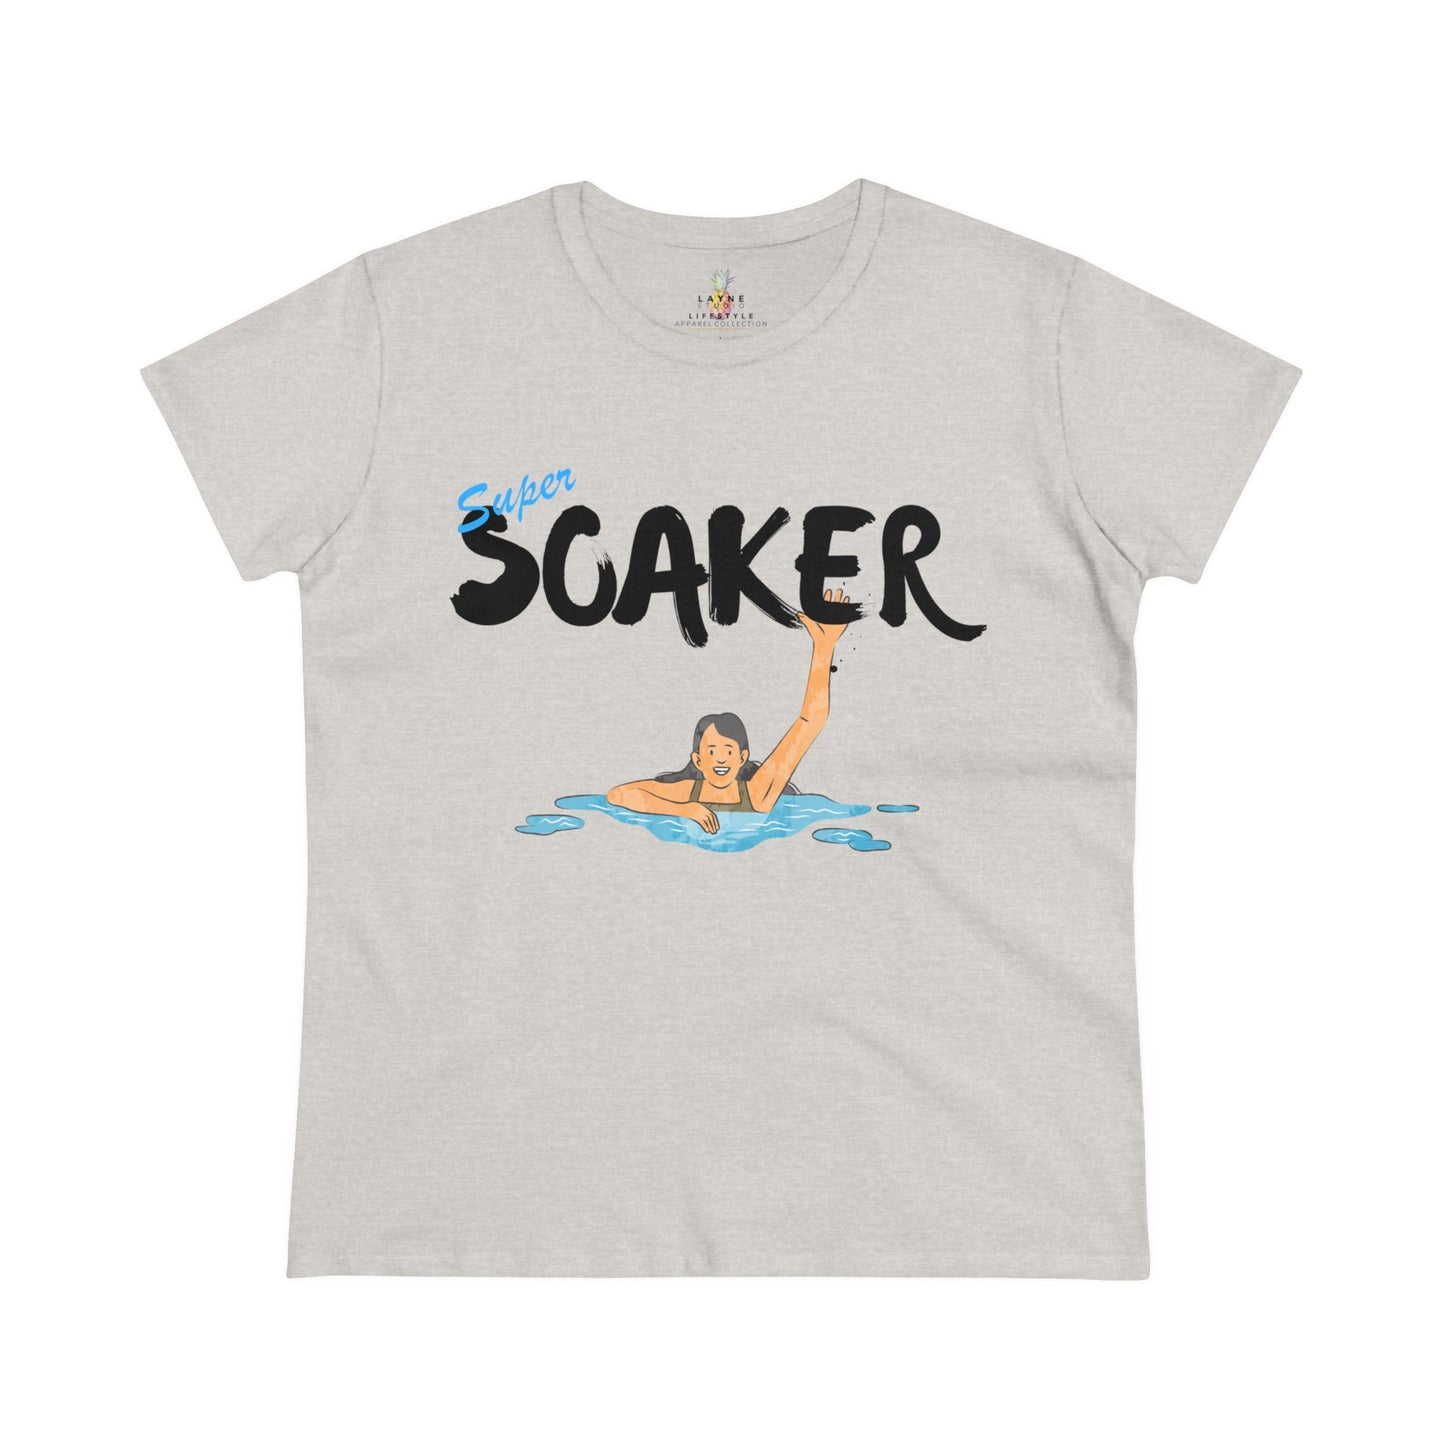 "Super Soaker Puddle" Graphic Women's Midweight Cotton Tee